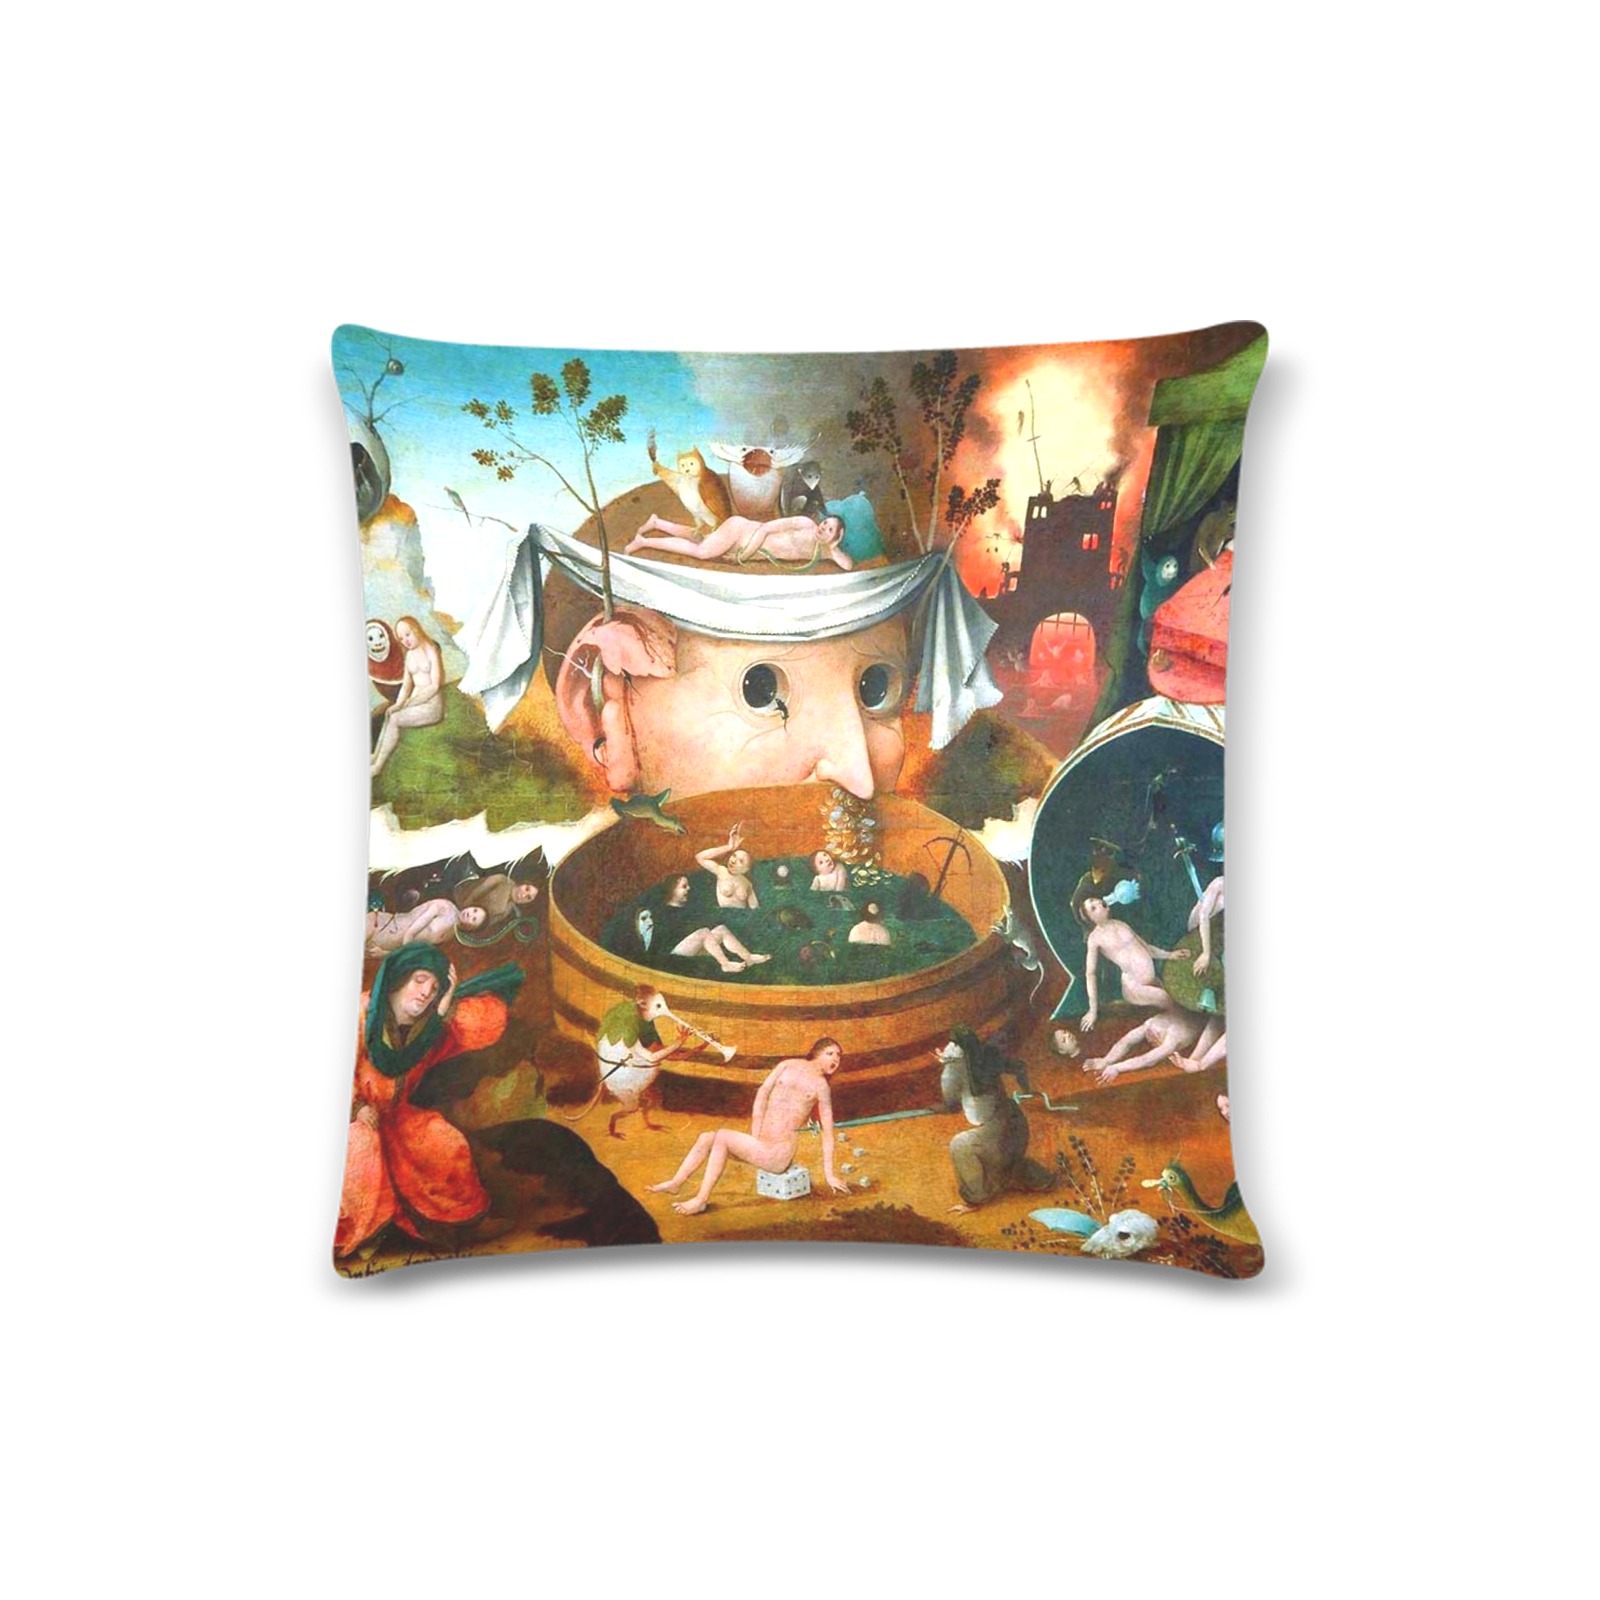 Hieronymus Bosch-The Vision of Tondal Custom Zippered Pillow Case 16"x16" (one side)